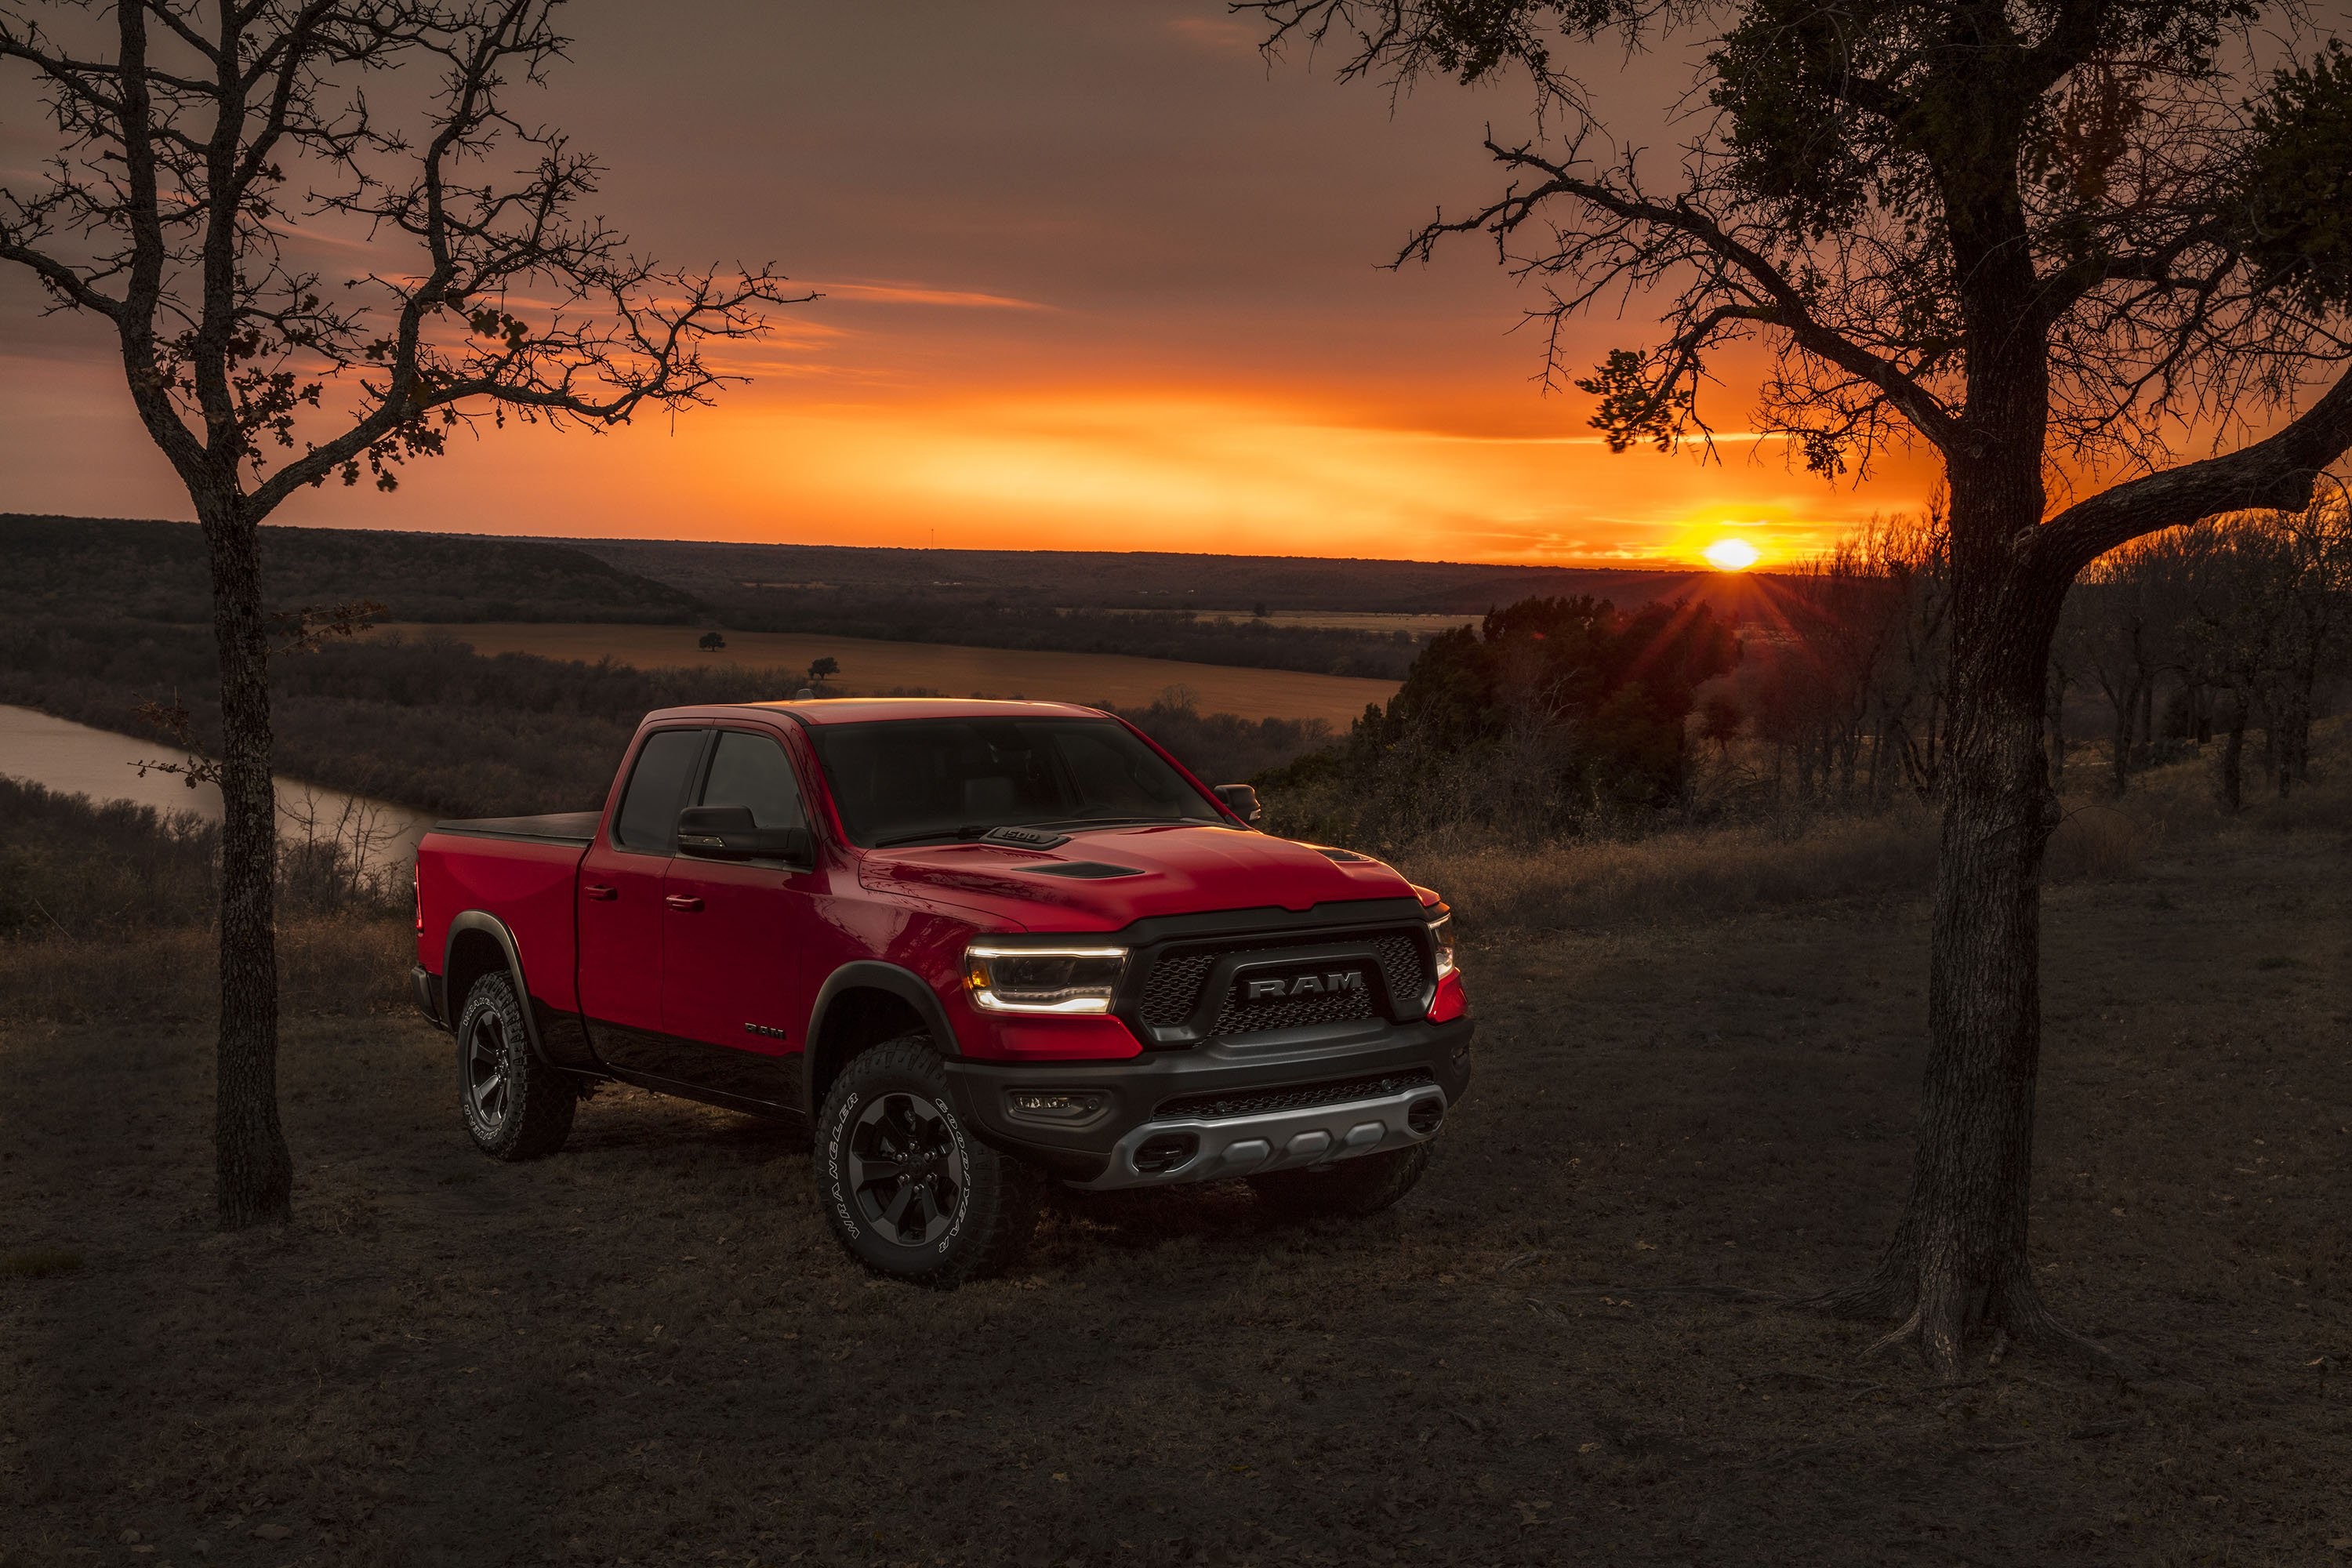 3000x2000 Wallpaper of the Day: 2019 Ram 1500